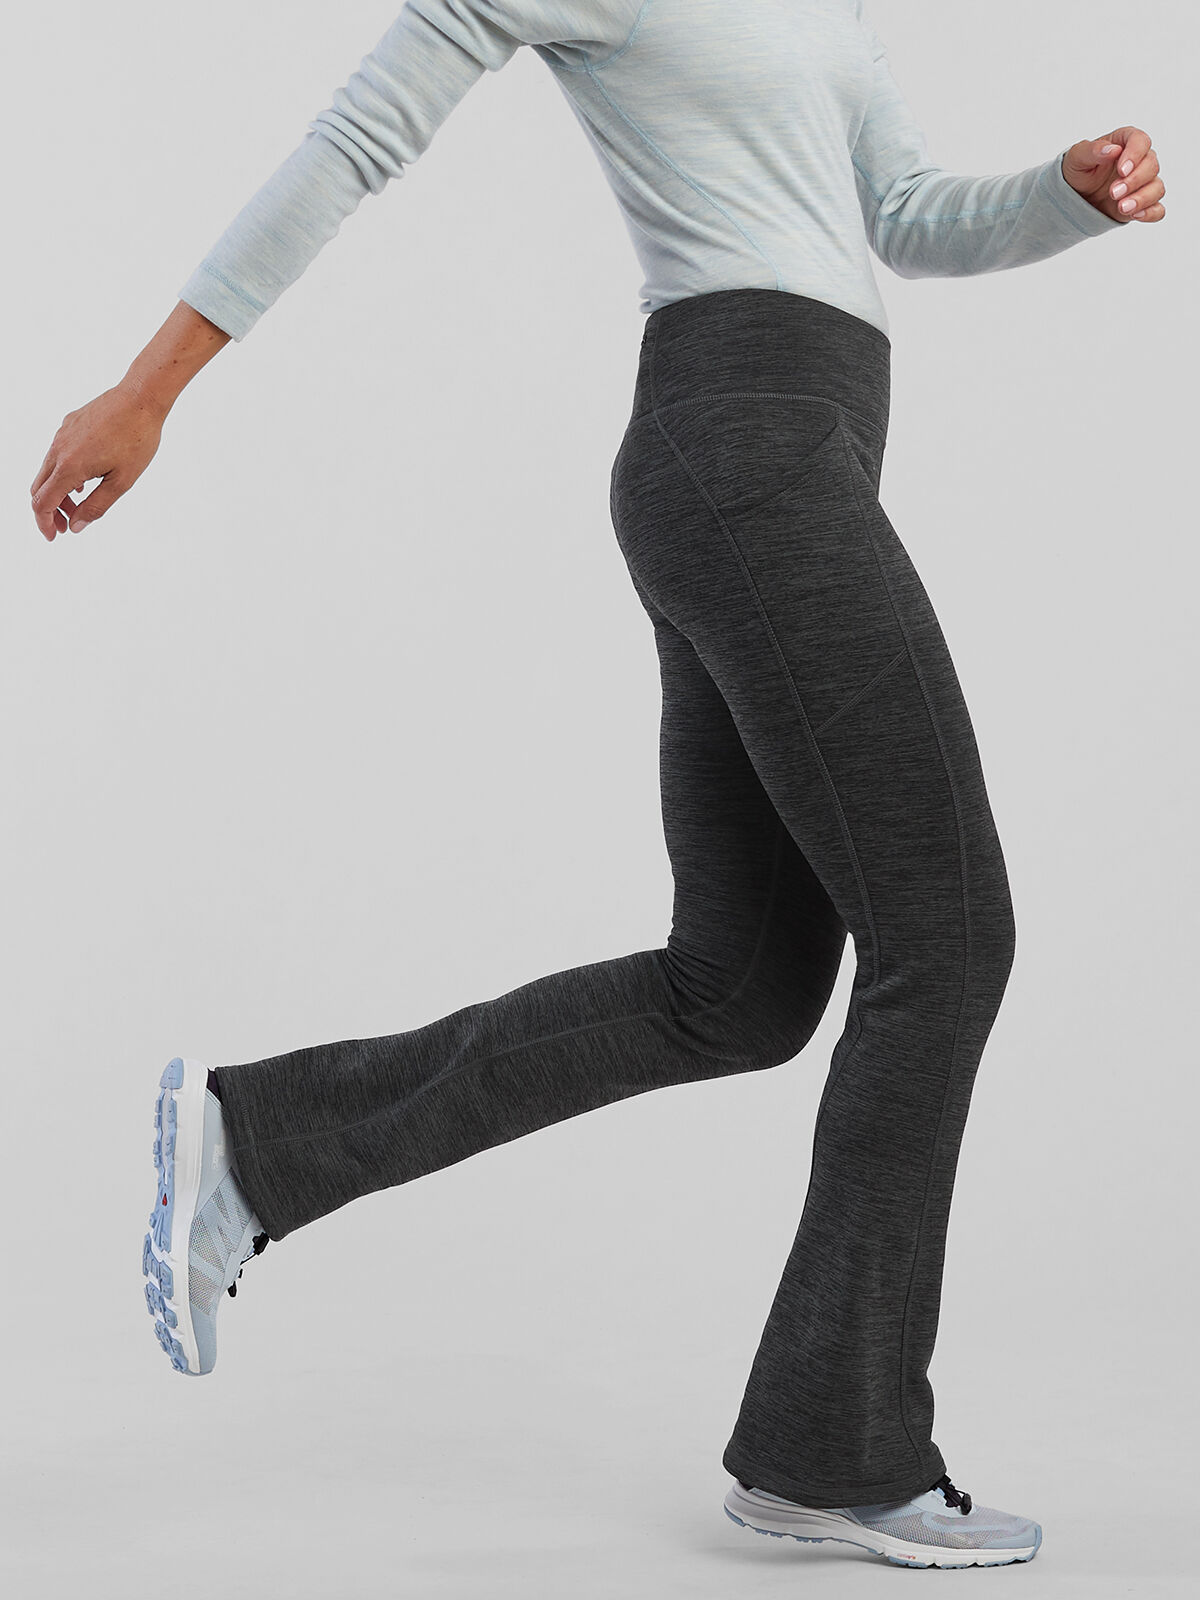 Power Flex Wide Leg Petite Bootcut Yoga Pants With Tummy Control For  Running, Gym, And Workout 4 Way Stretch Boot Cut Leggings Style #7294249  From Wmgb, $31.2 | DHgate.Com